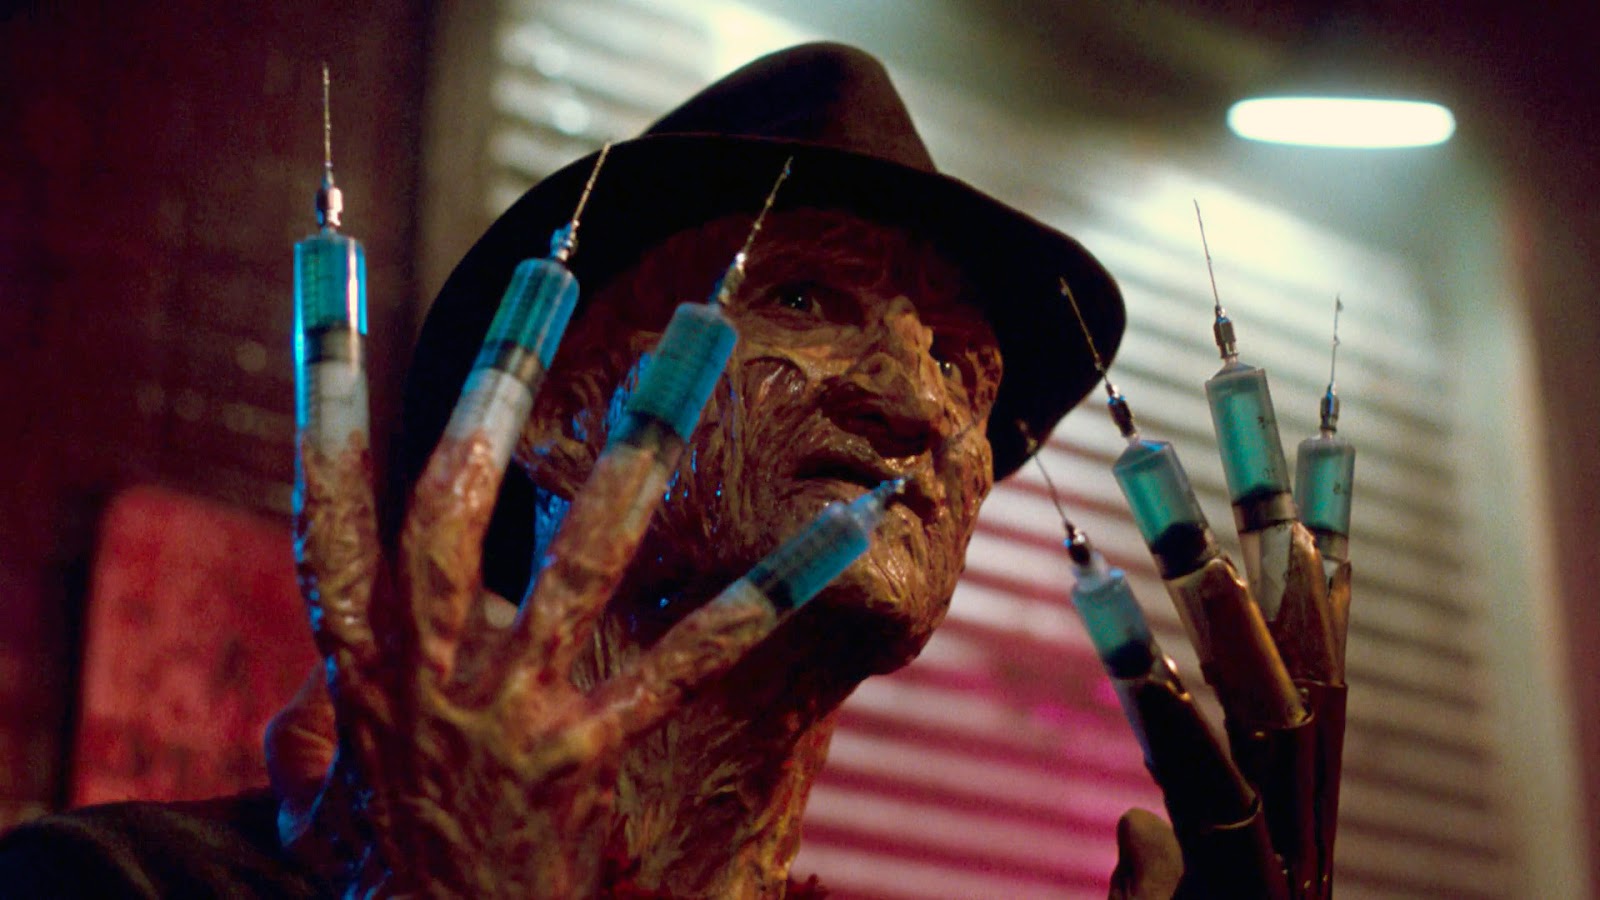 This is a still from the film A Nightmare on Elm Street 3: Dream Warriors.